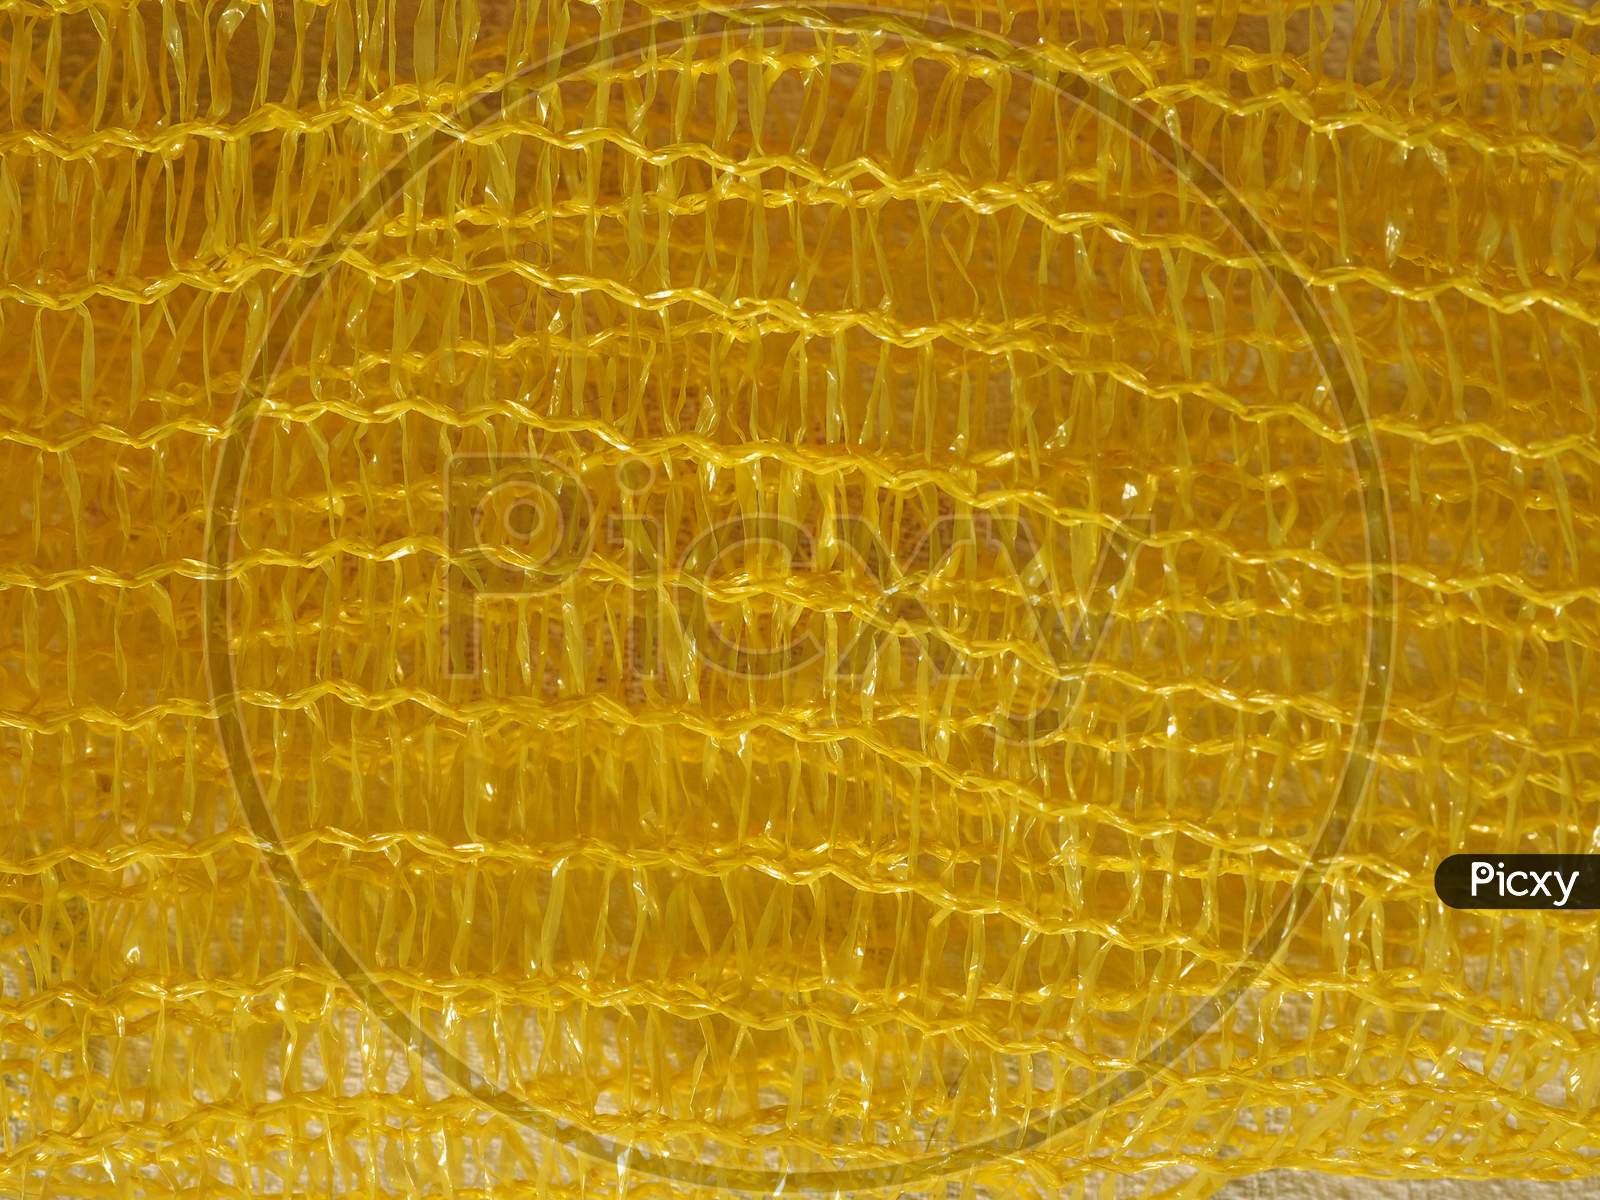 Net Sack For Potatoes Background